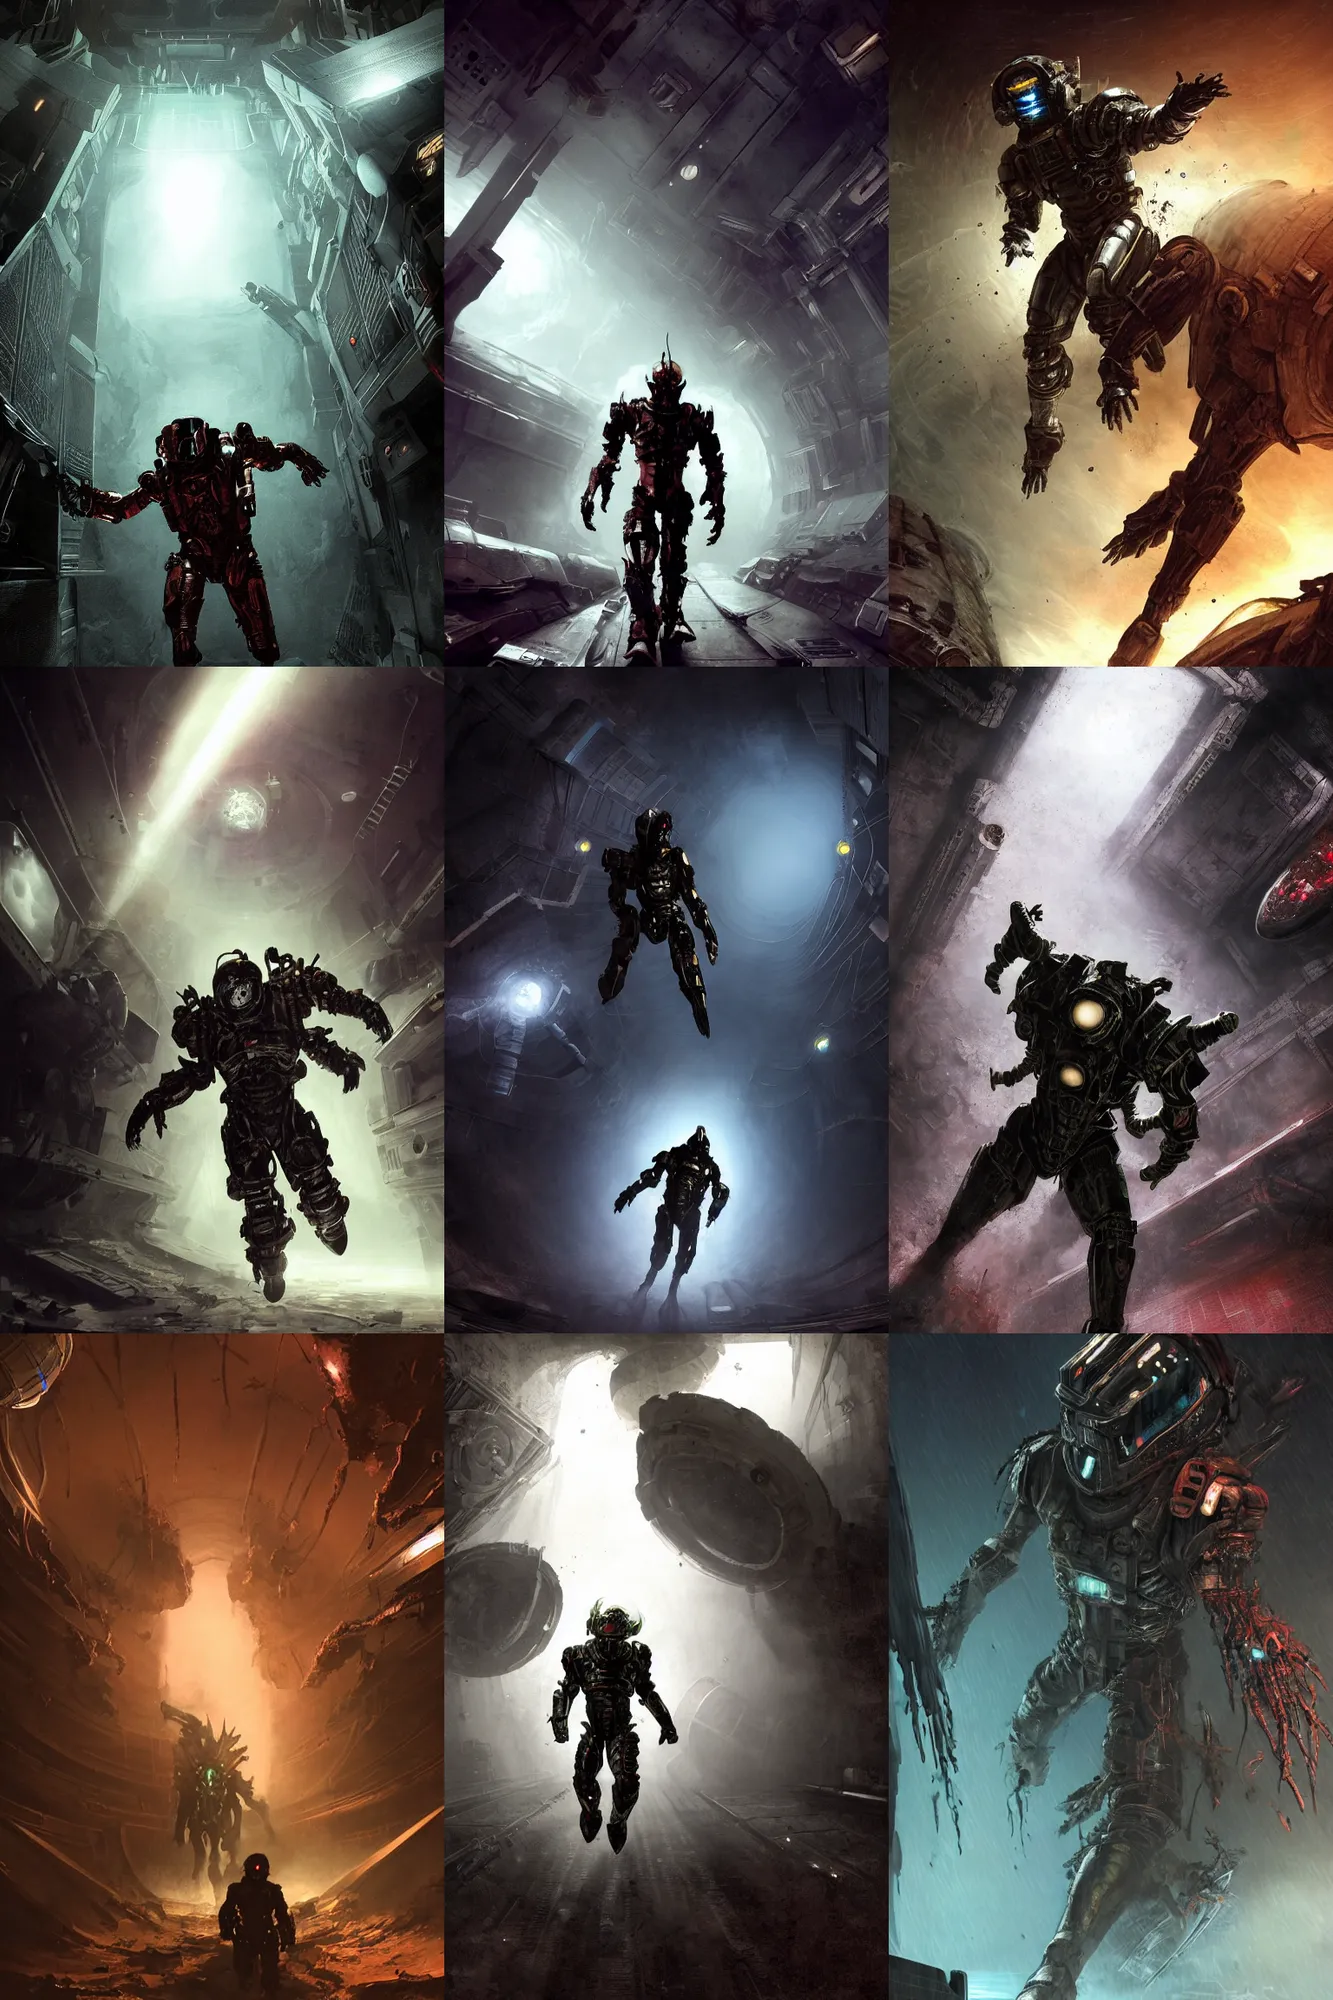 Prompt: horror movie scene of an individual in futuristic armor being chased down a hallway, running through a deep space mining space station, rusty metal walls, broken pipes, side angle, dark colors, muted colors, tense atmosphere, mist floats in the air, amazing value control, dead space, moody colors, dramatic lighting, ussg ishimura, frank frazetta